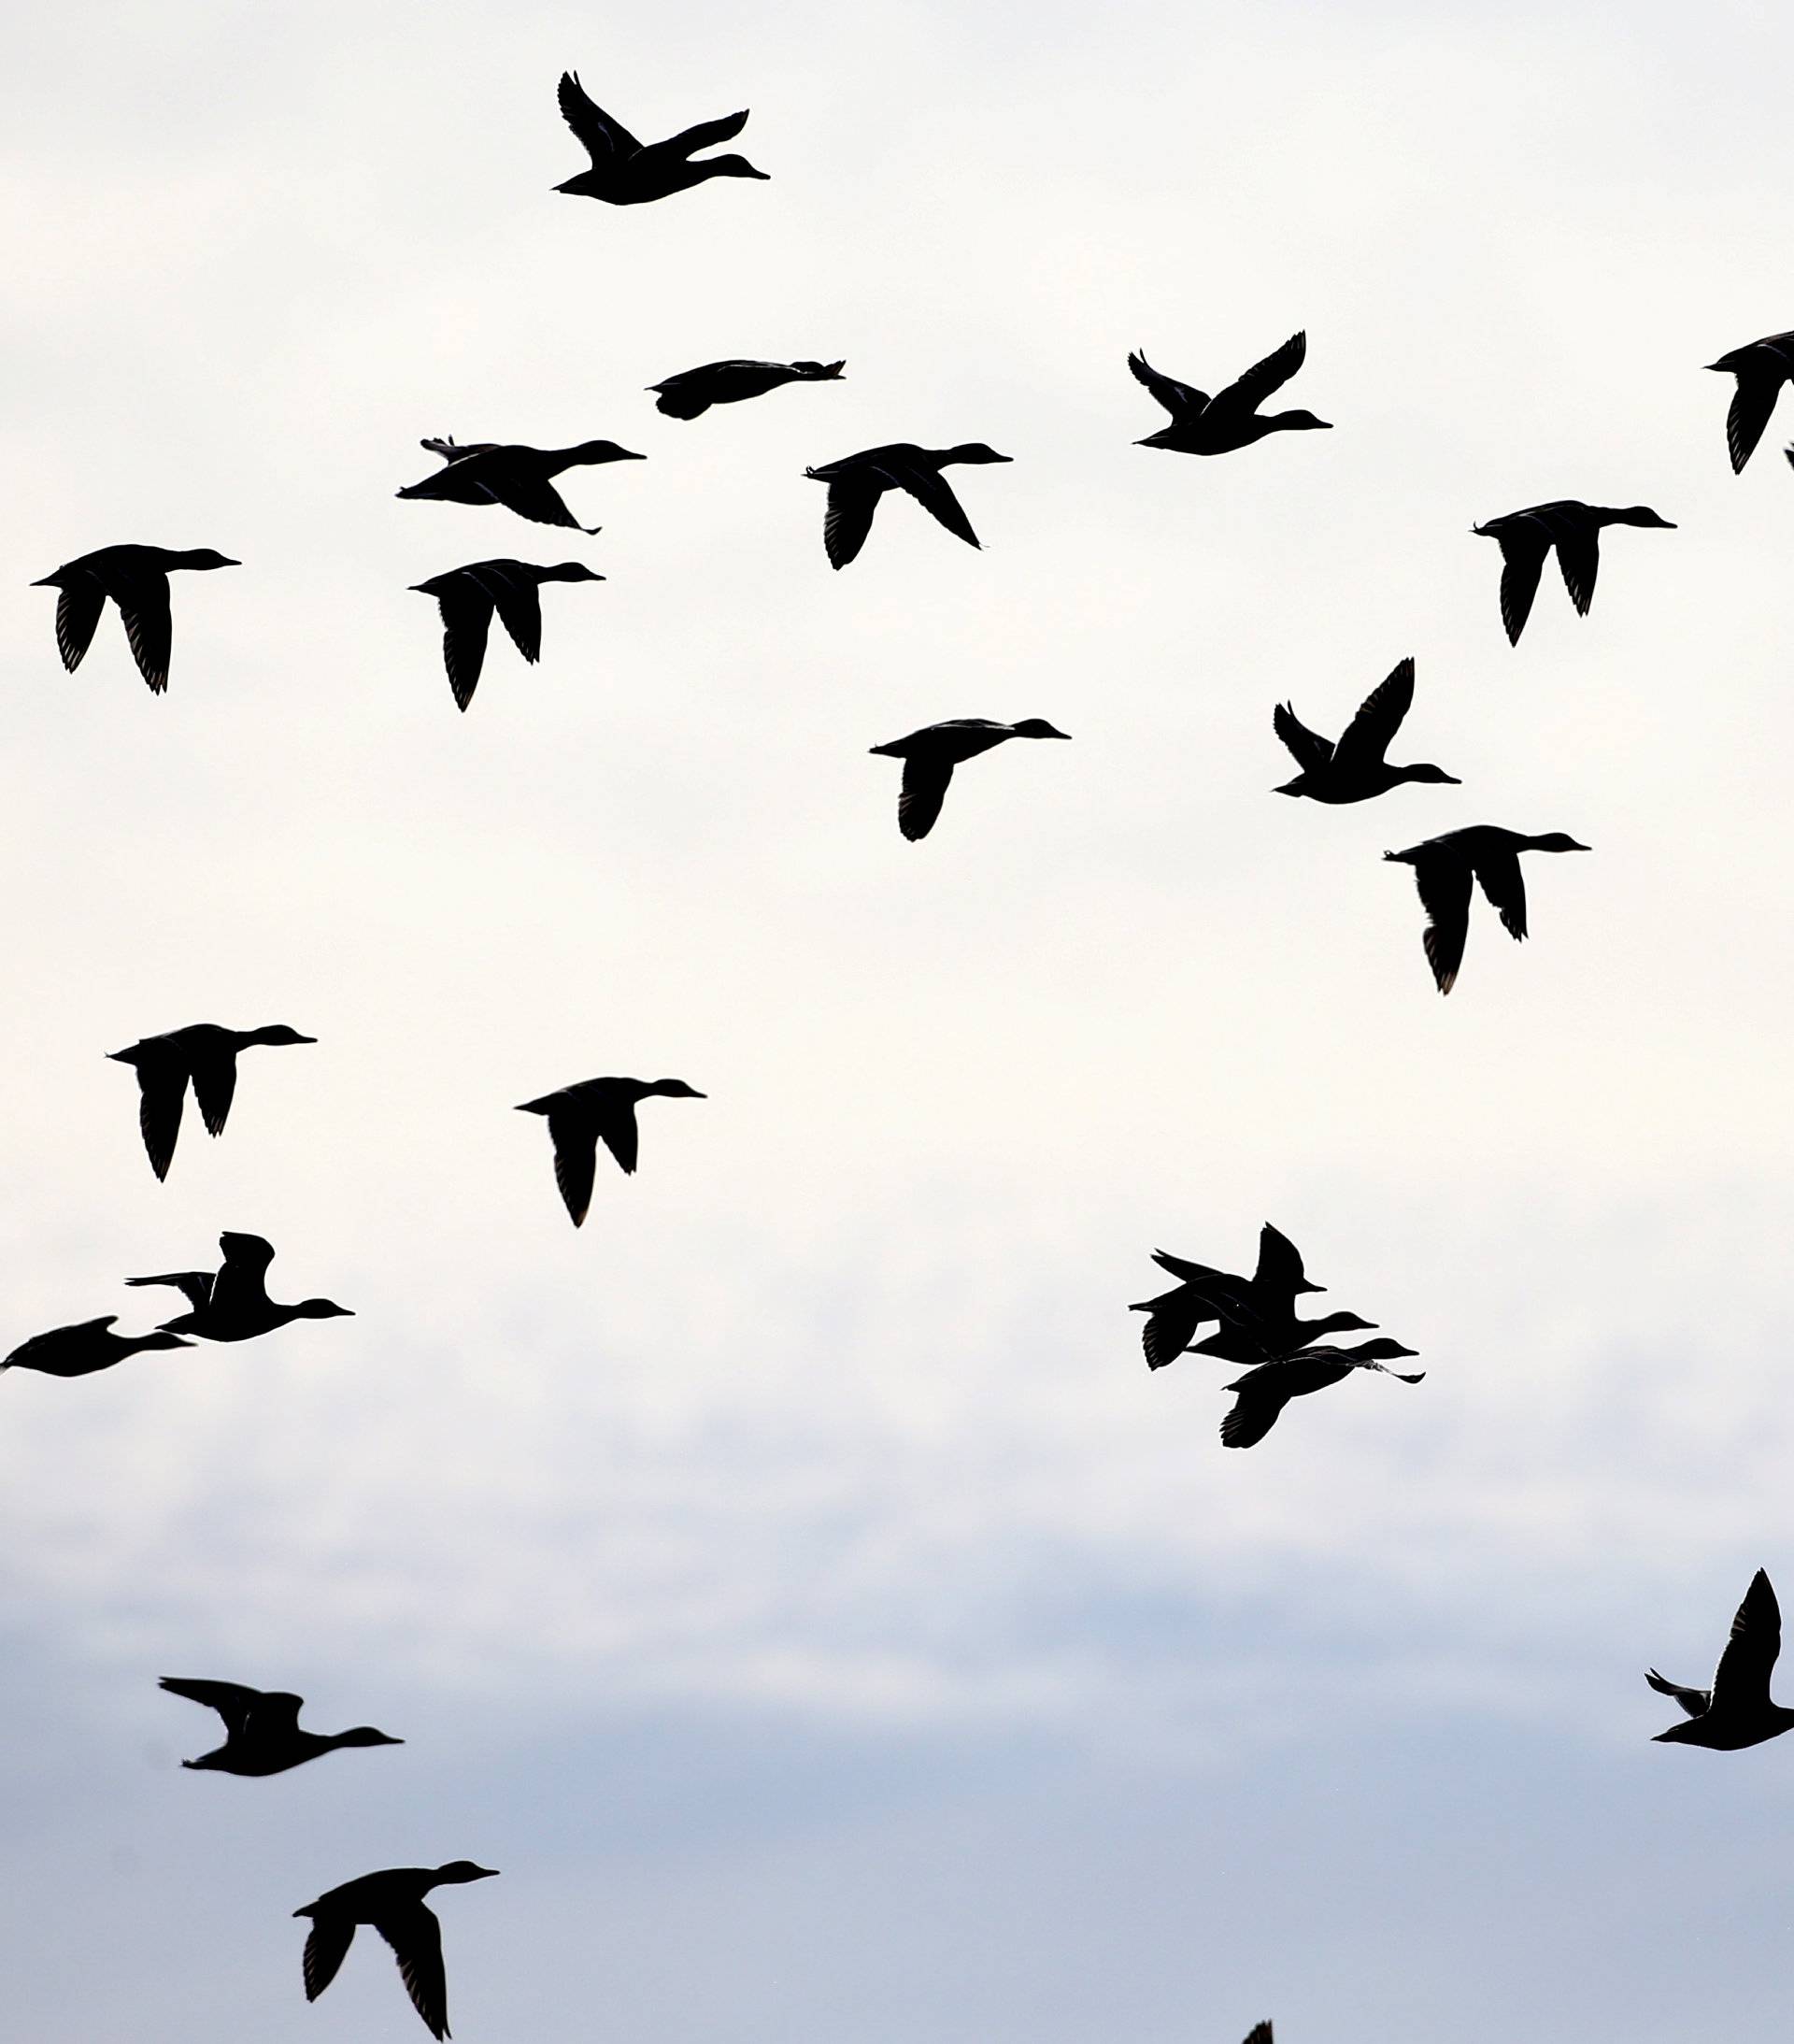 Ducks fly during a hunt in a field near the village of Novosyolki